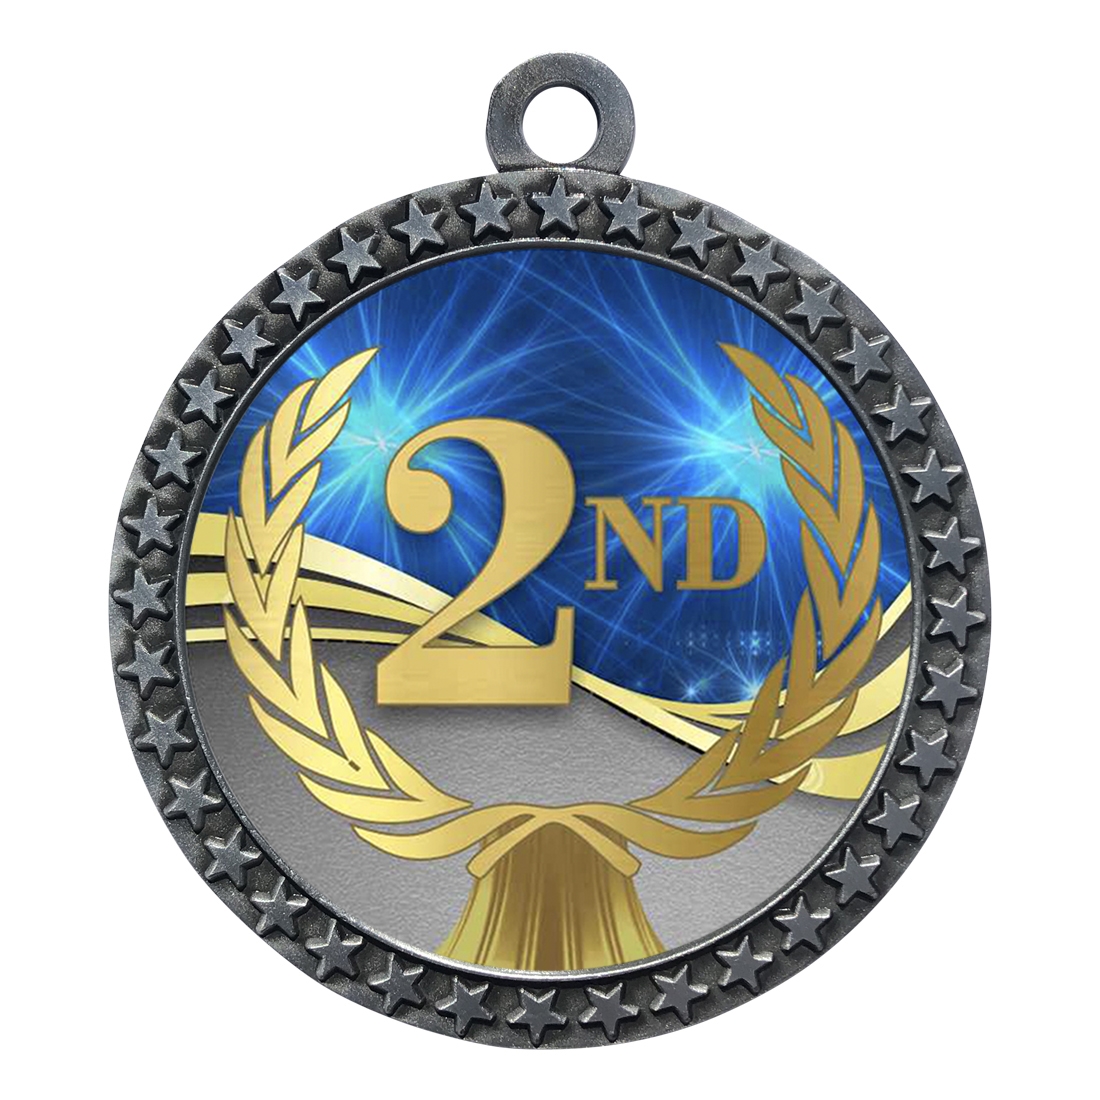 2-1/2" 2nd Place Medal